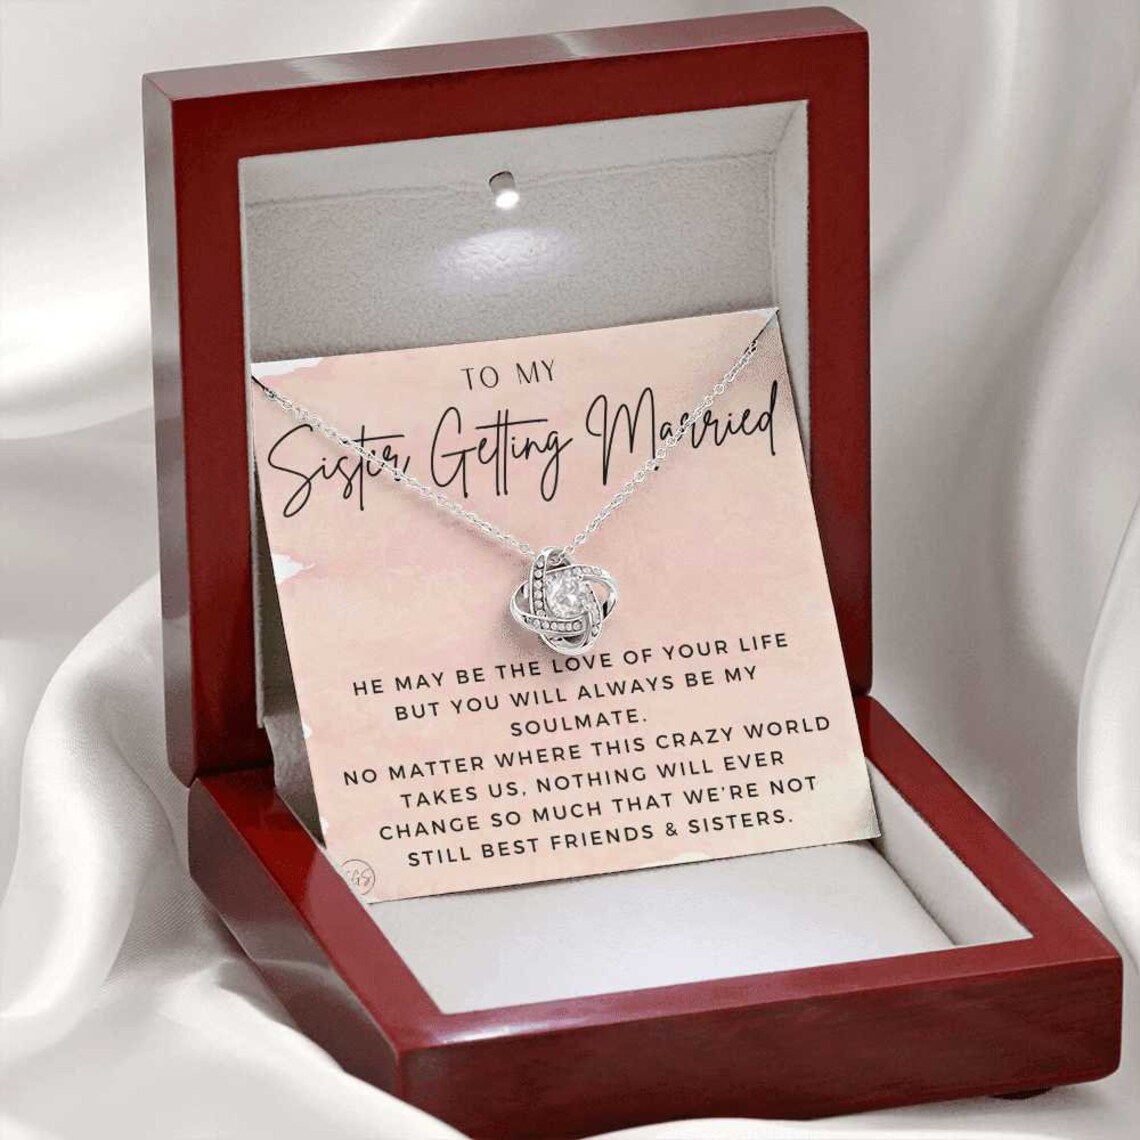 My Sister Getting Married Gift for the Bride Engagement - Etsy